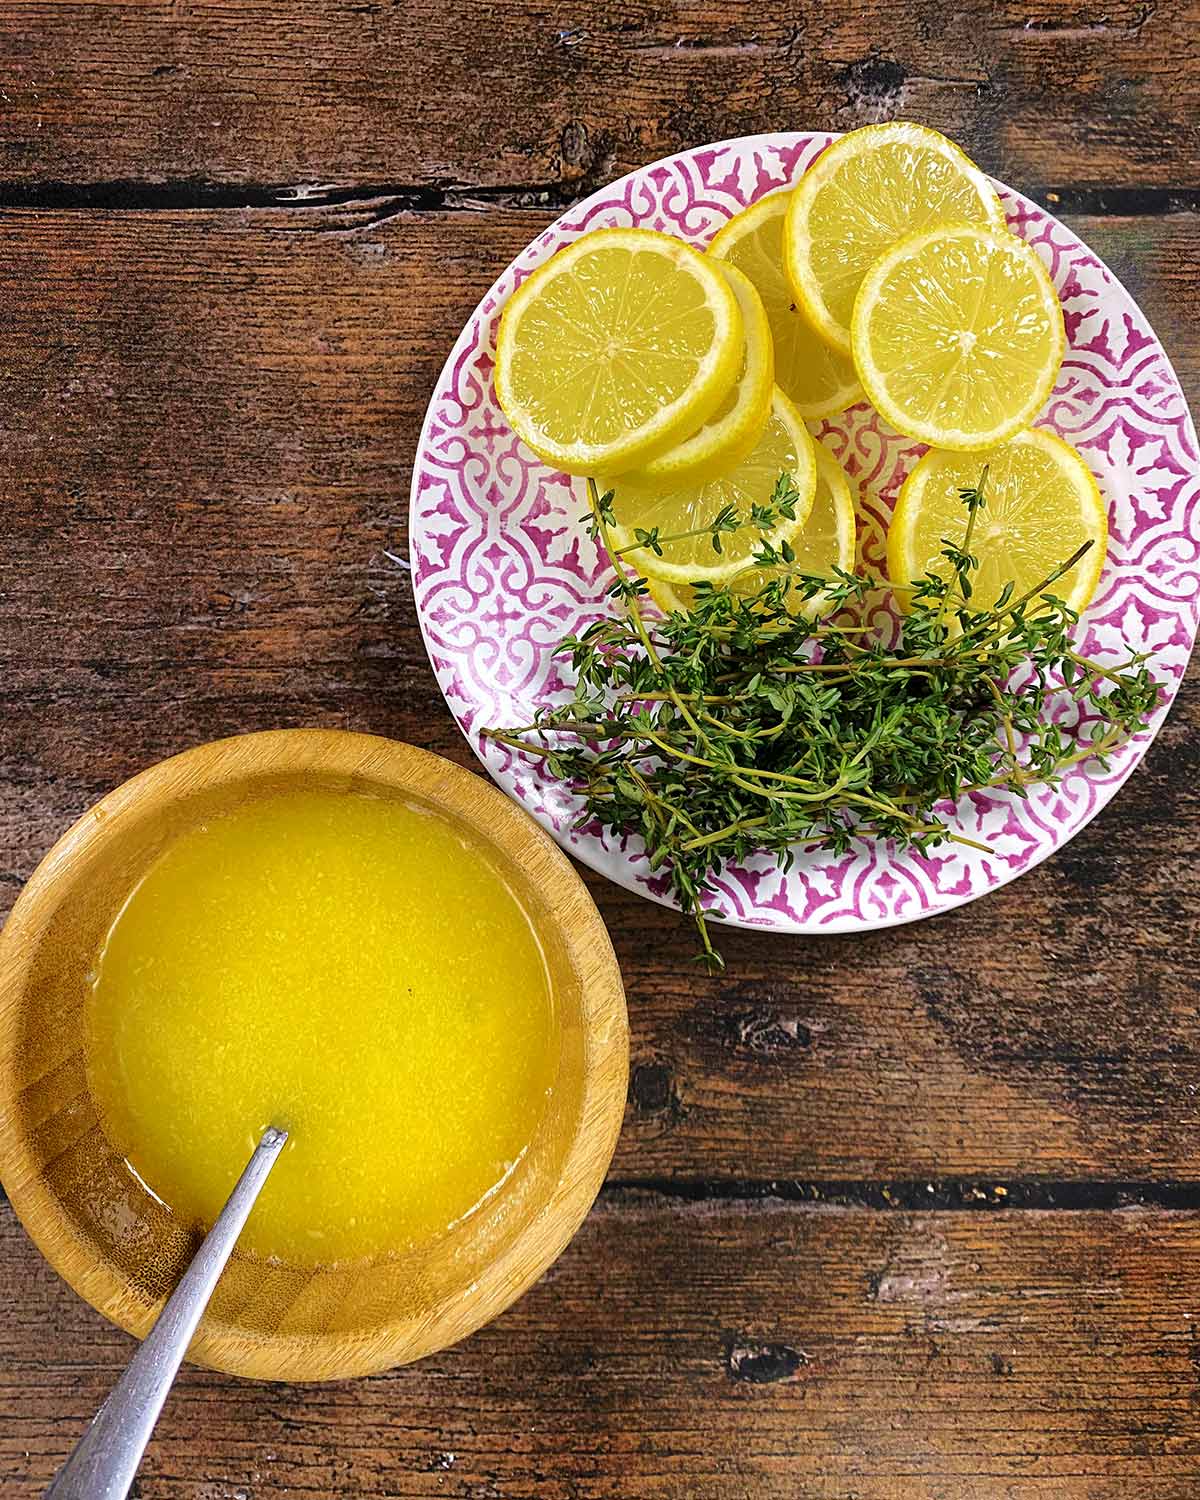 A small bowl of melted butter next to a plate of lemon slices and sprigs of thyme.